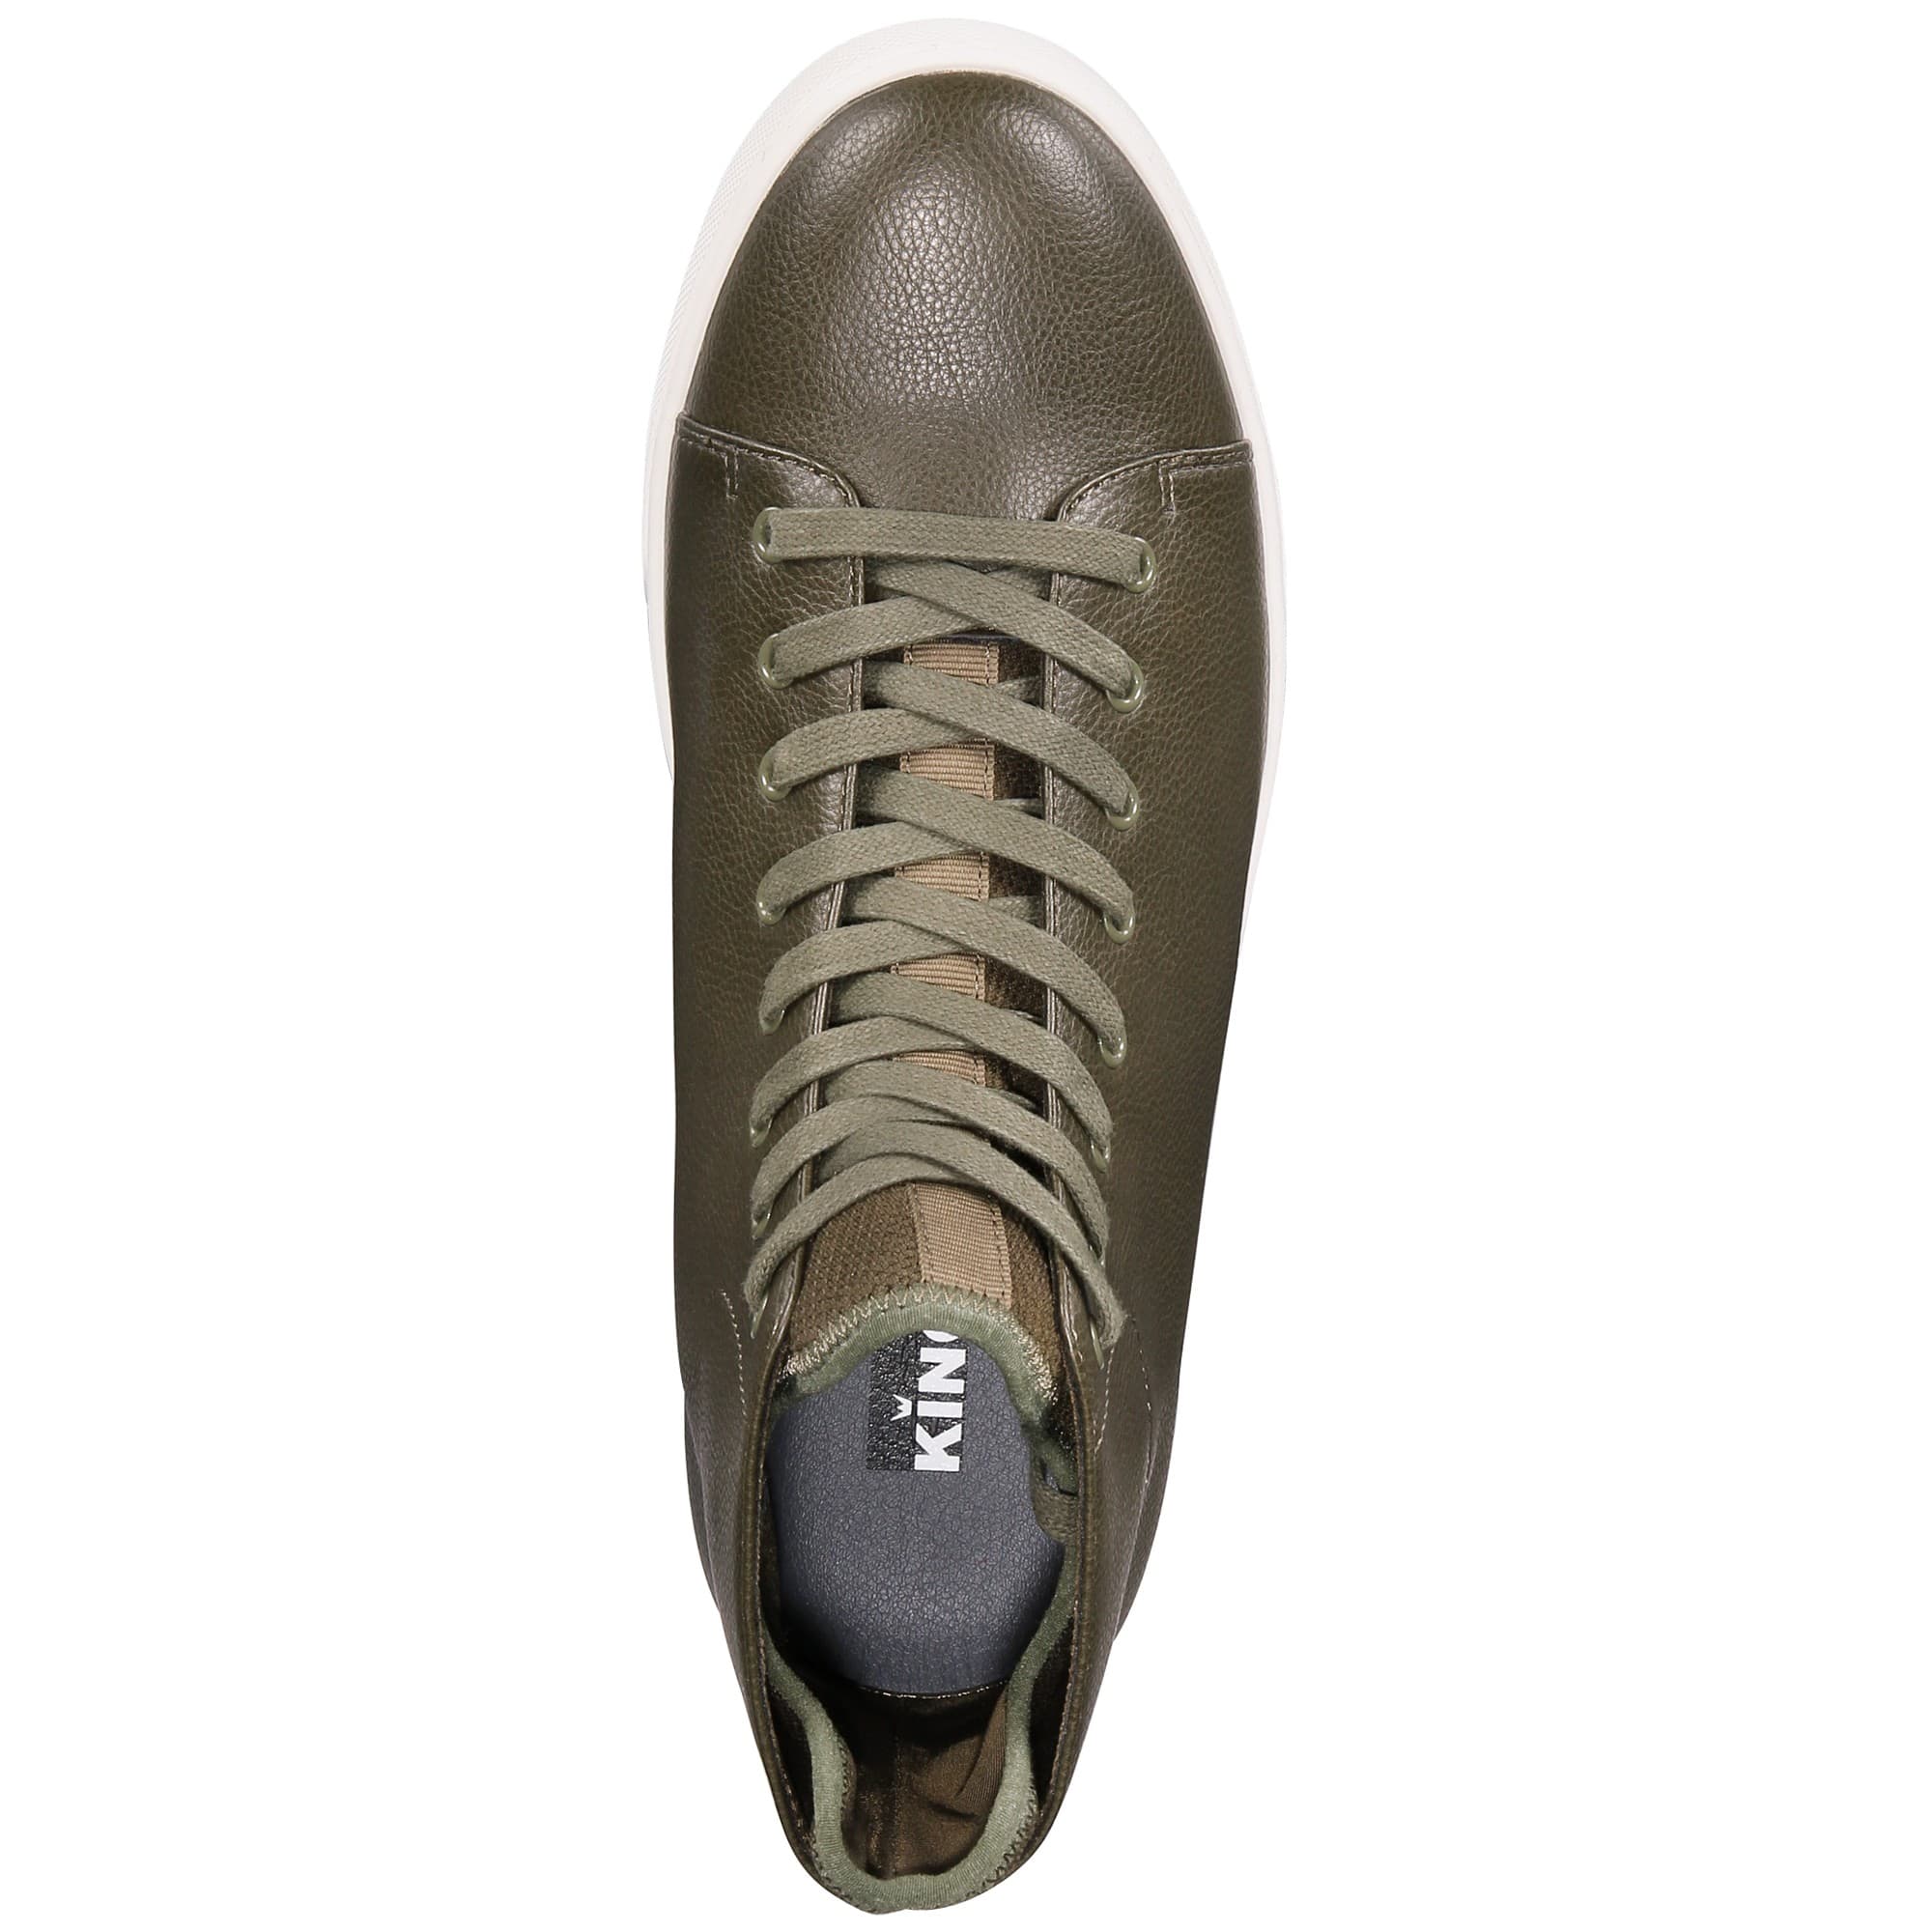 woocommerce-673321-2209615.cloudwaysapps.com-kingside-mens-olive-william-high-top-sneakers